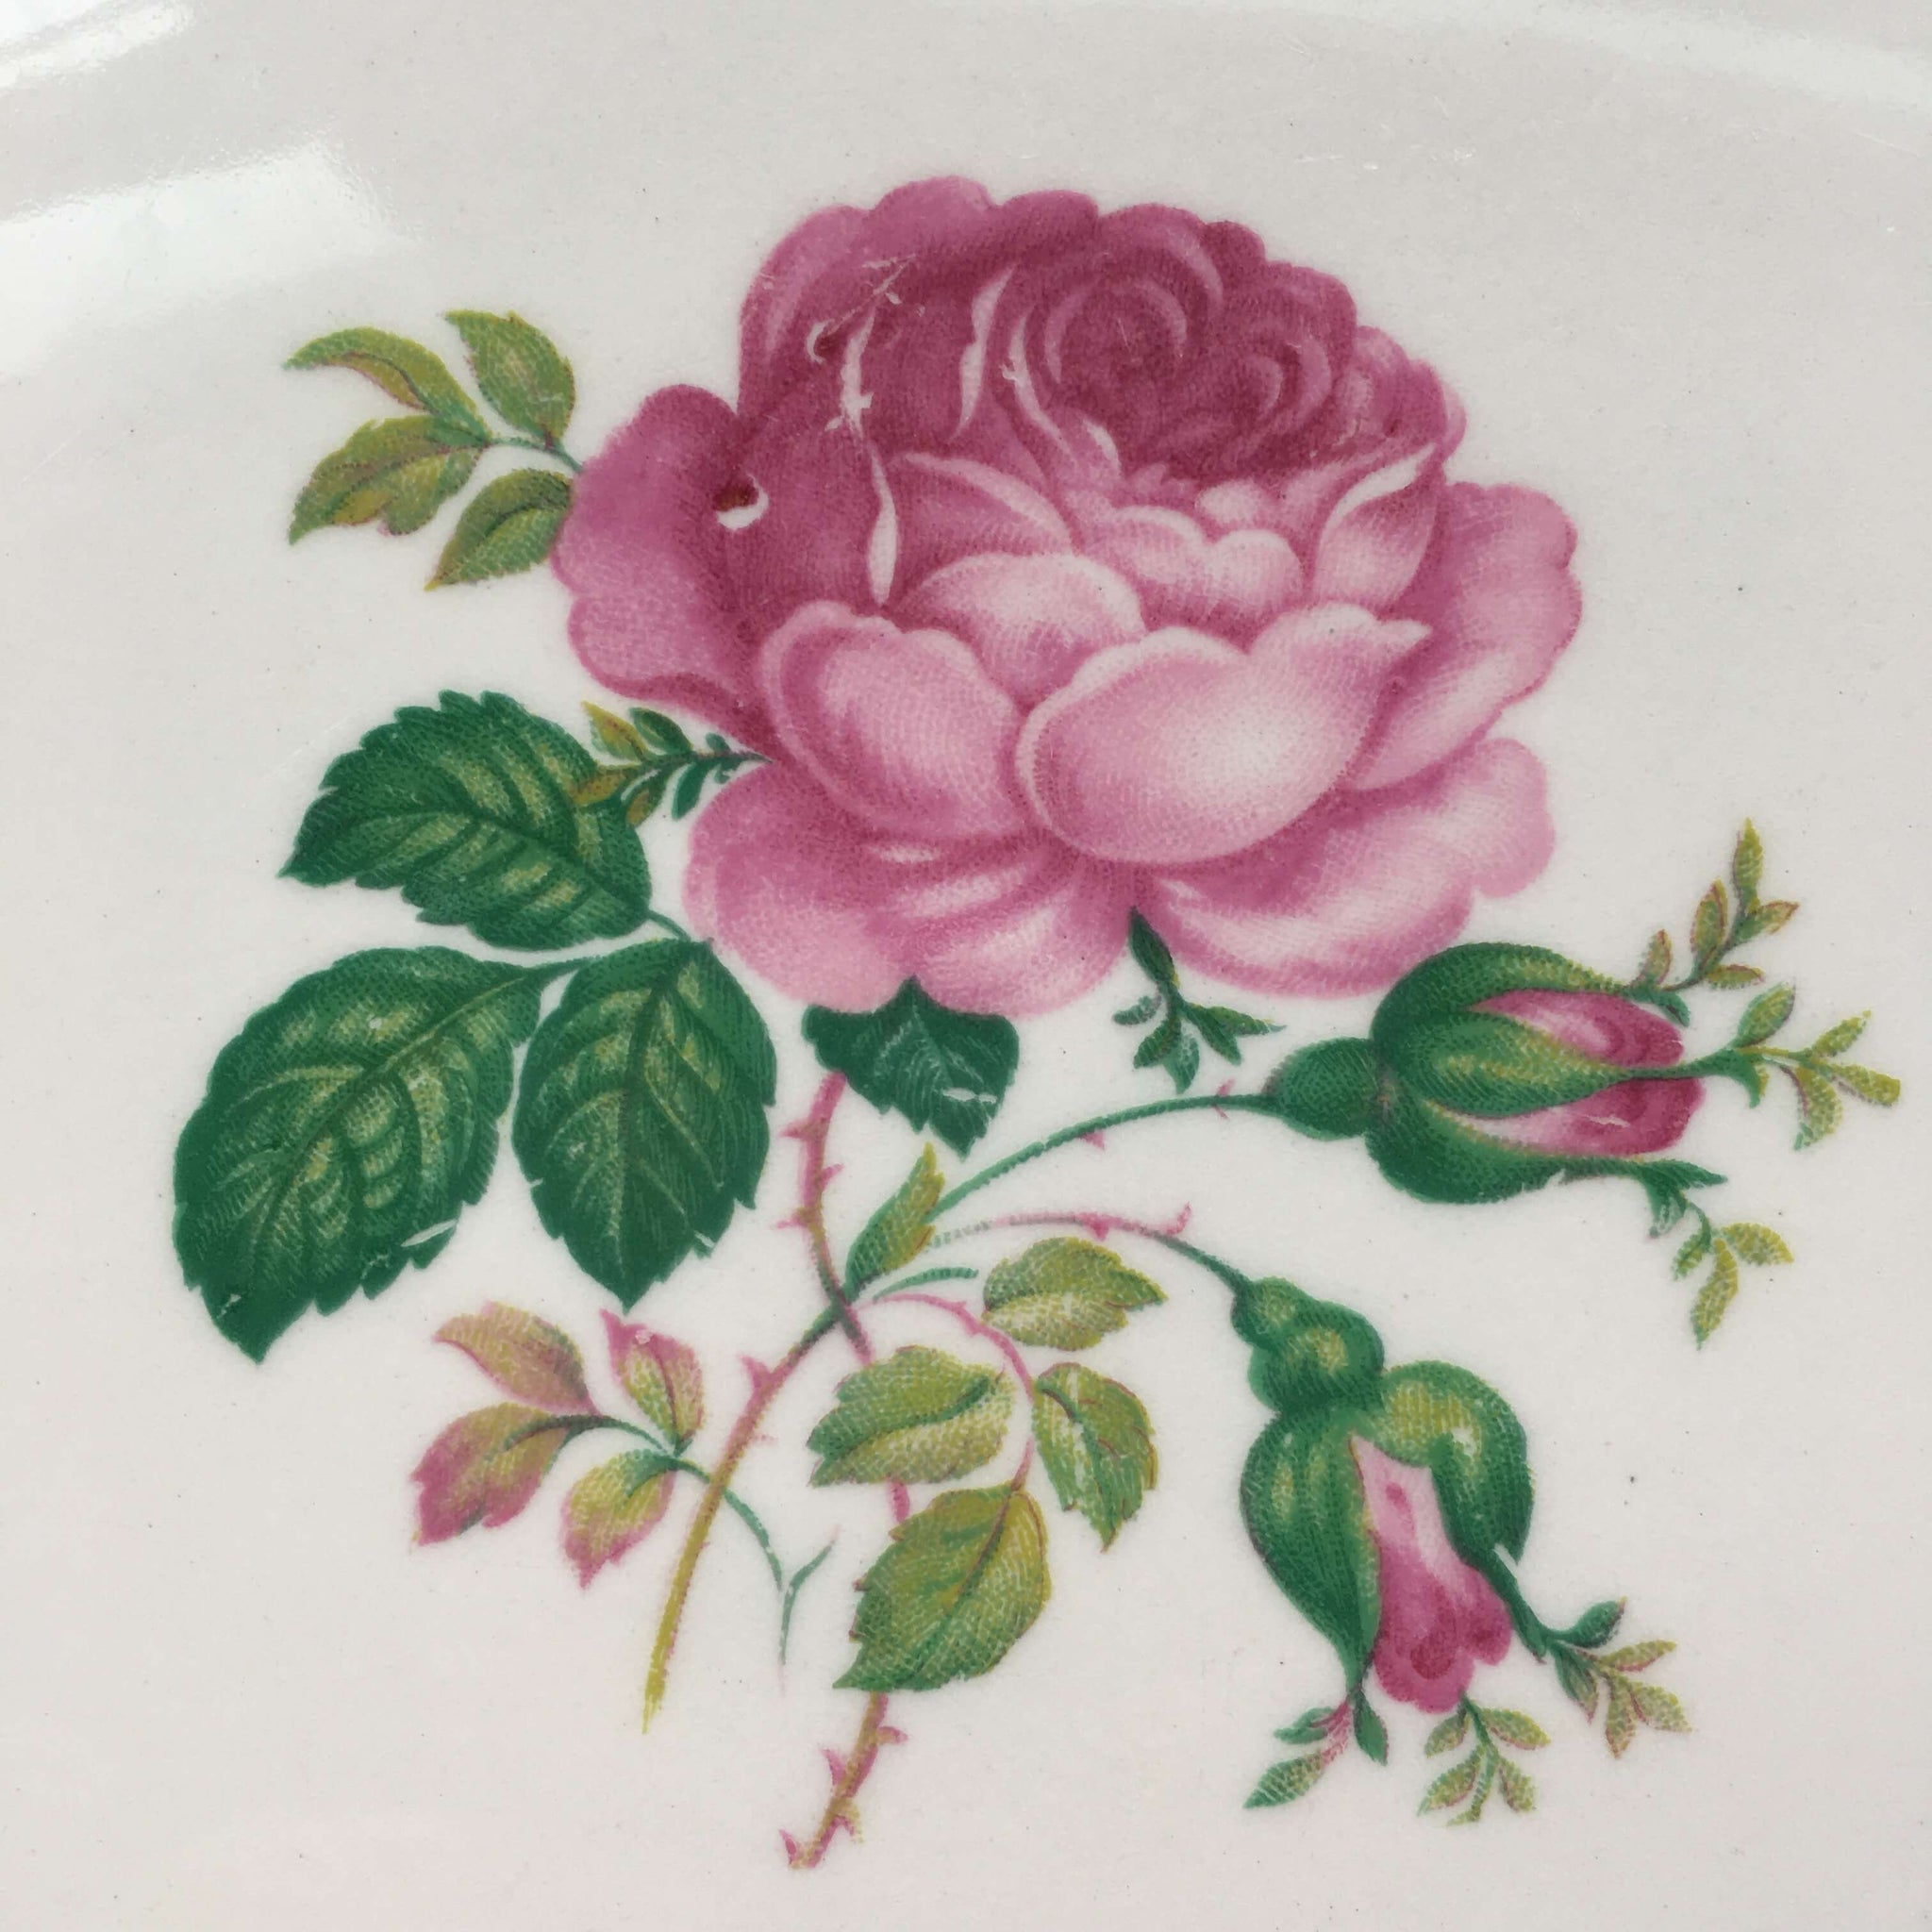 Vintage 1940s June Rose Dinner Plates - Washington Colonial by Vogue - Set of Two - Pink Rose